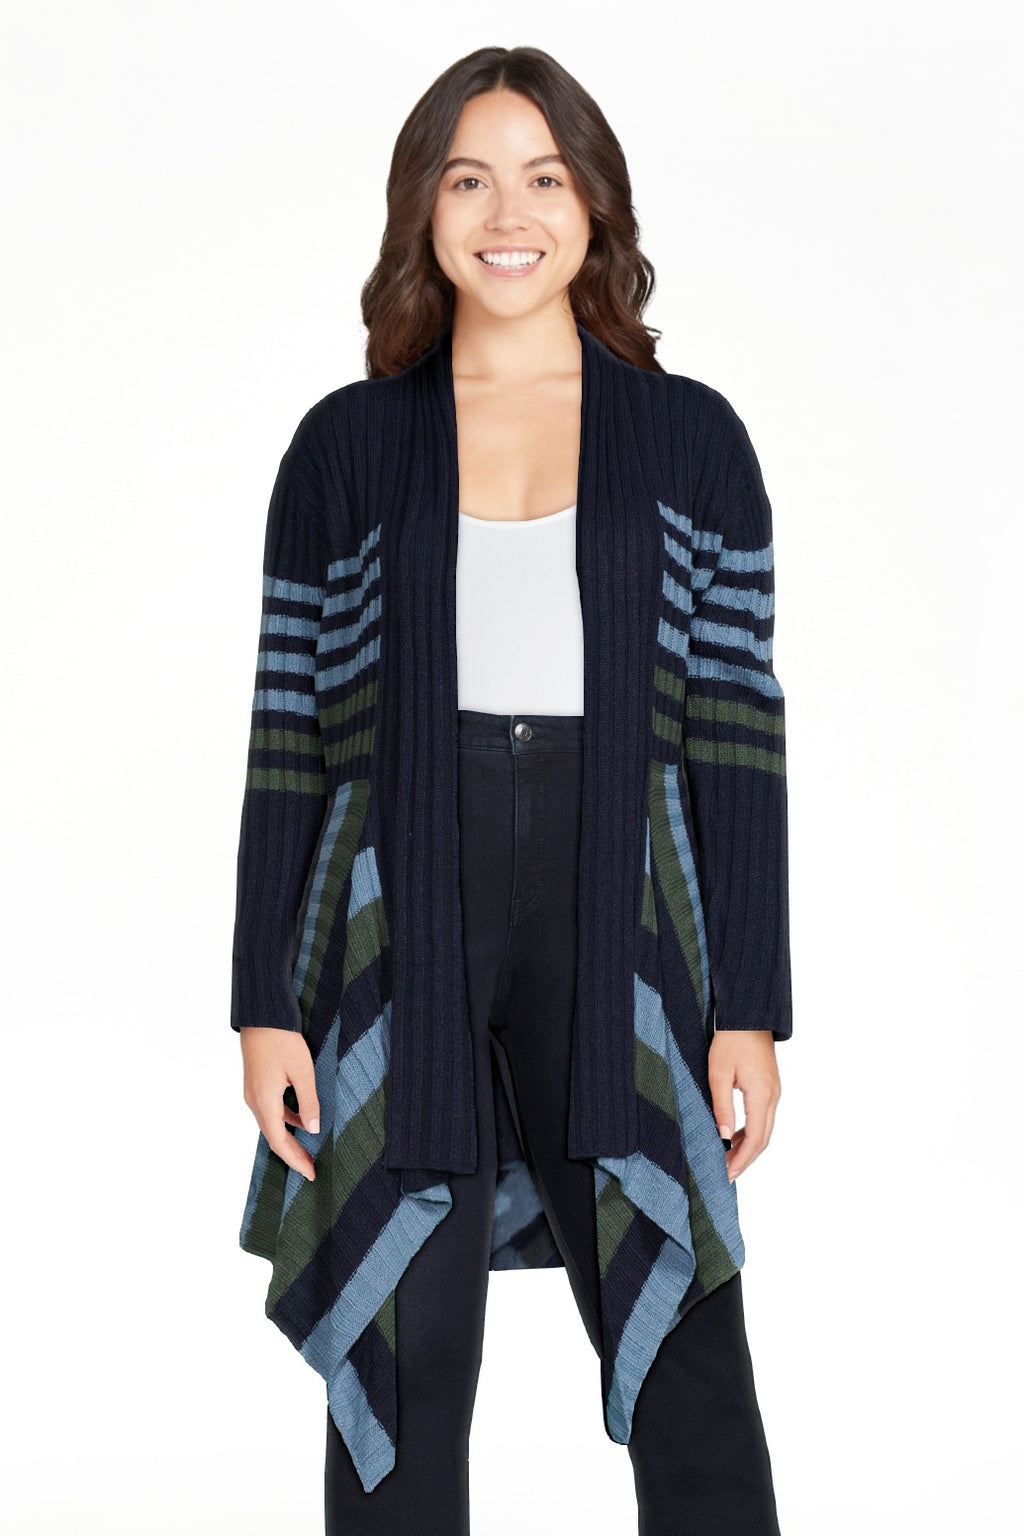 What's Next Women's and Women's Plus Size Ribbed Flyaway Cardigan - image 1 of 10